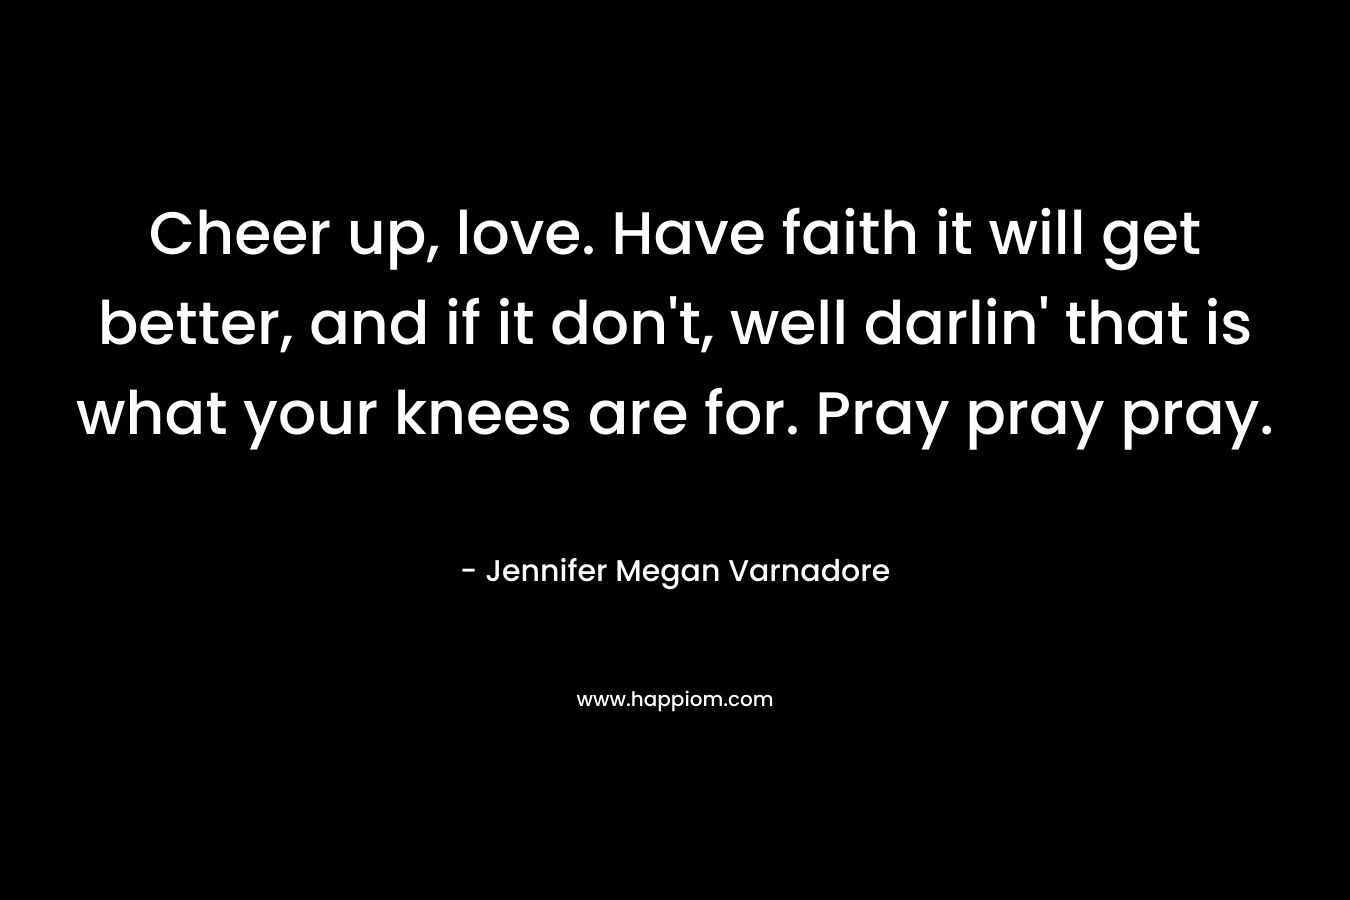 Cheer up, love. Have faith it will get better, and if it don't, well darlin' that is what your knees are for. Pray pray pray.